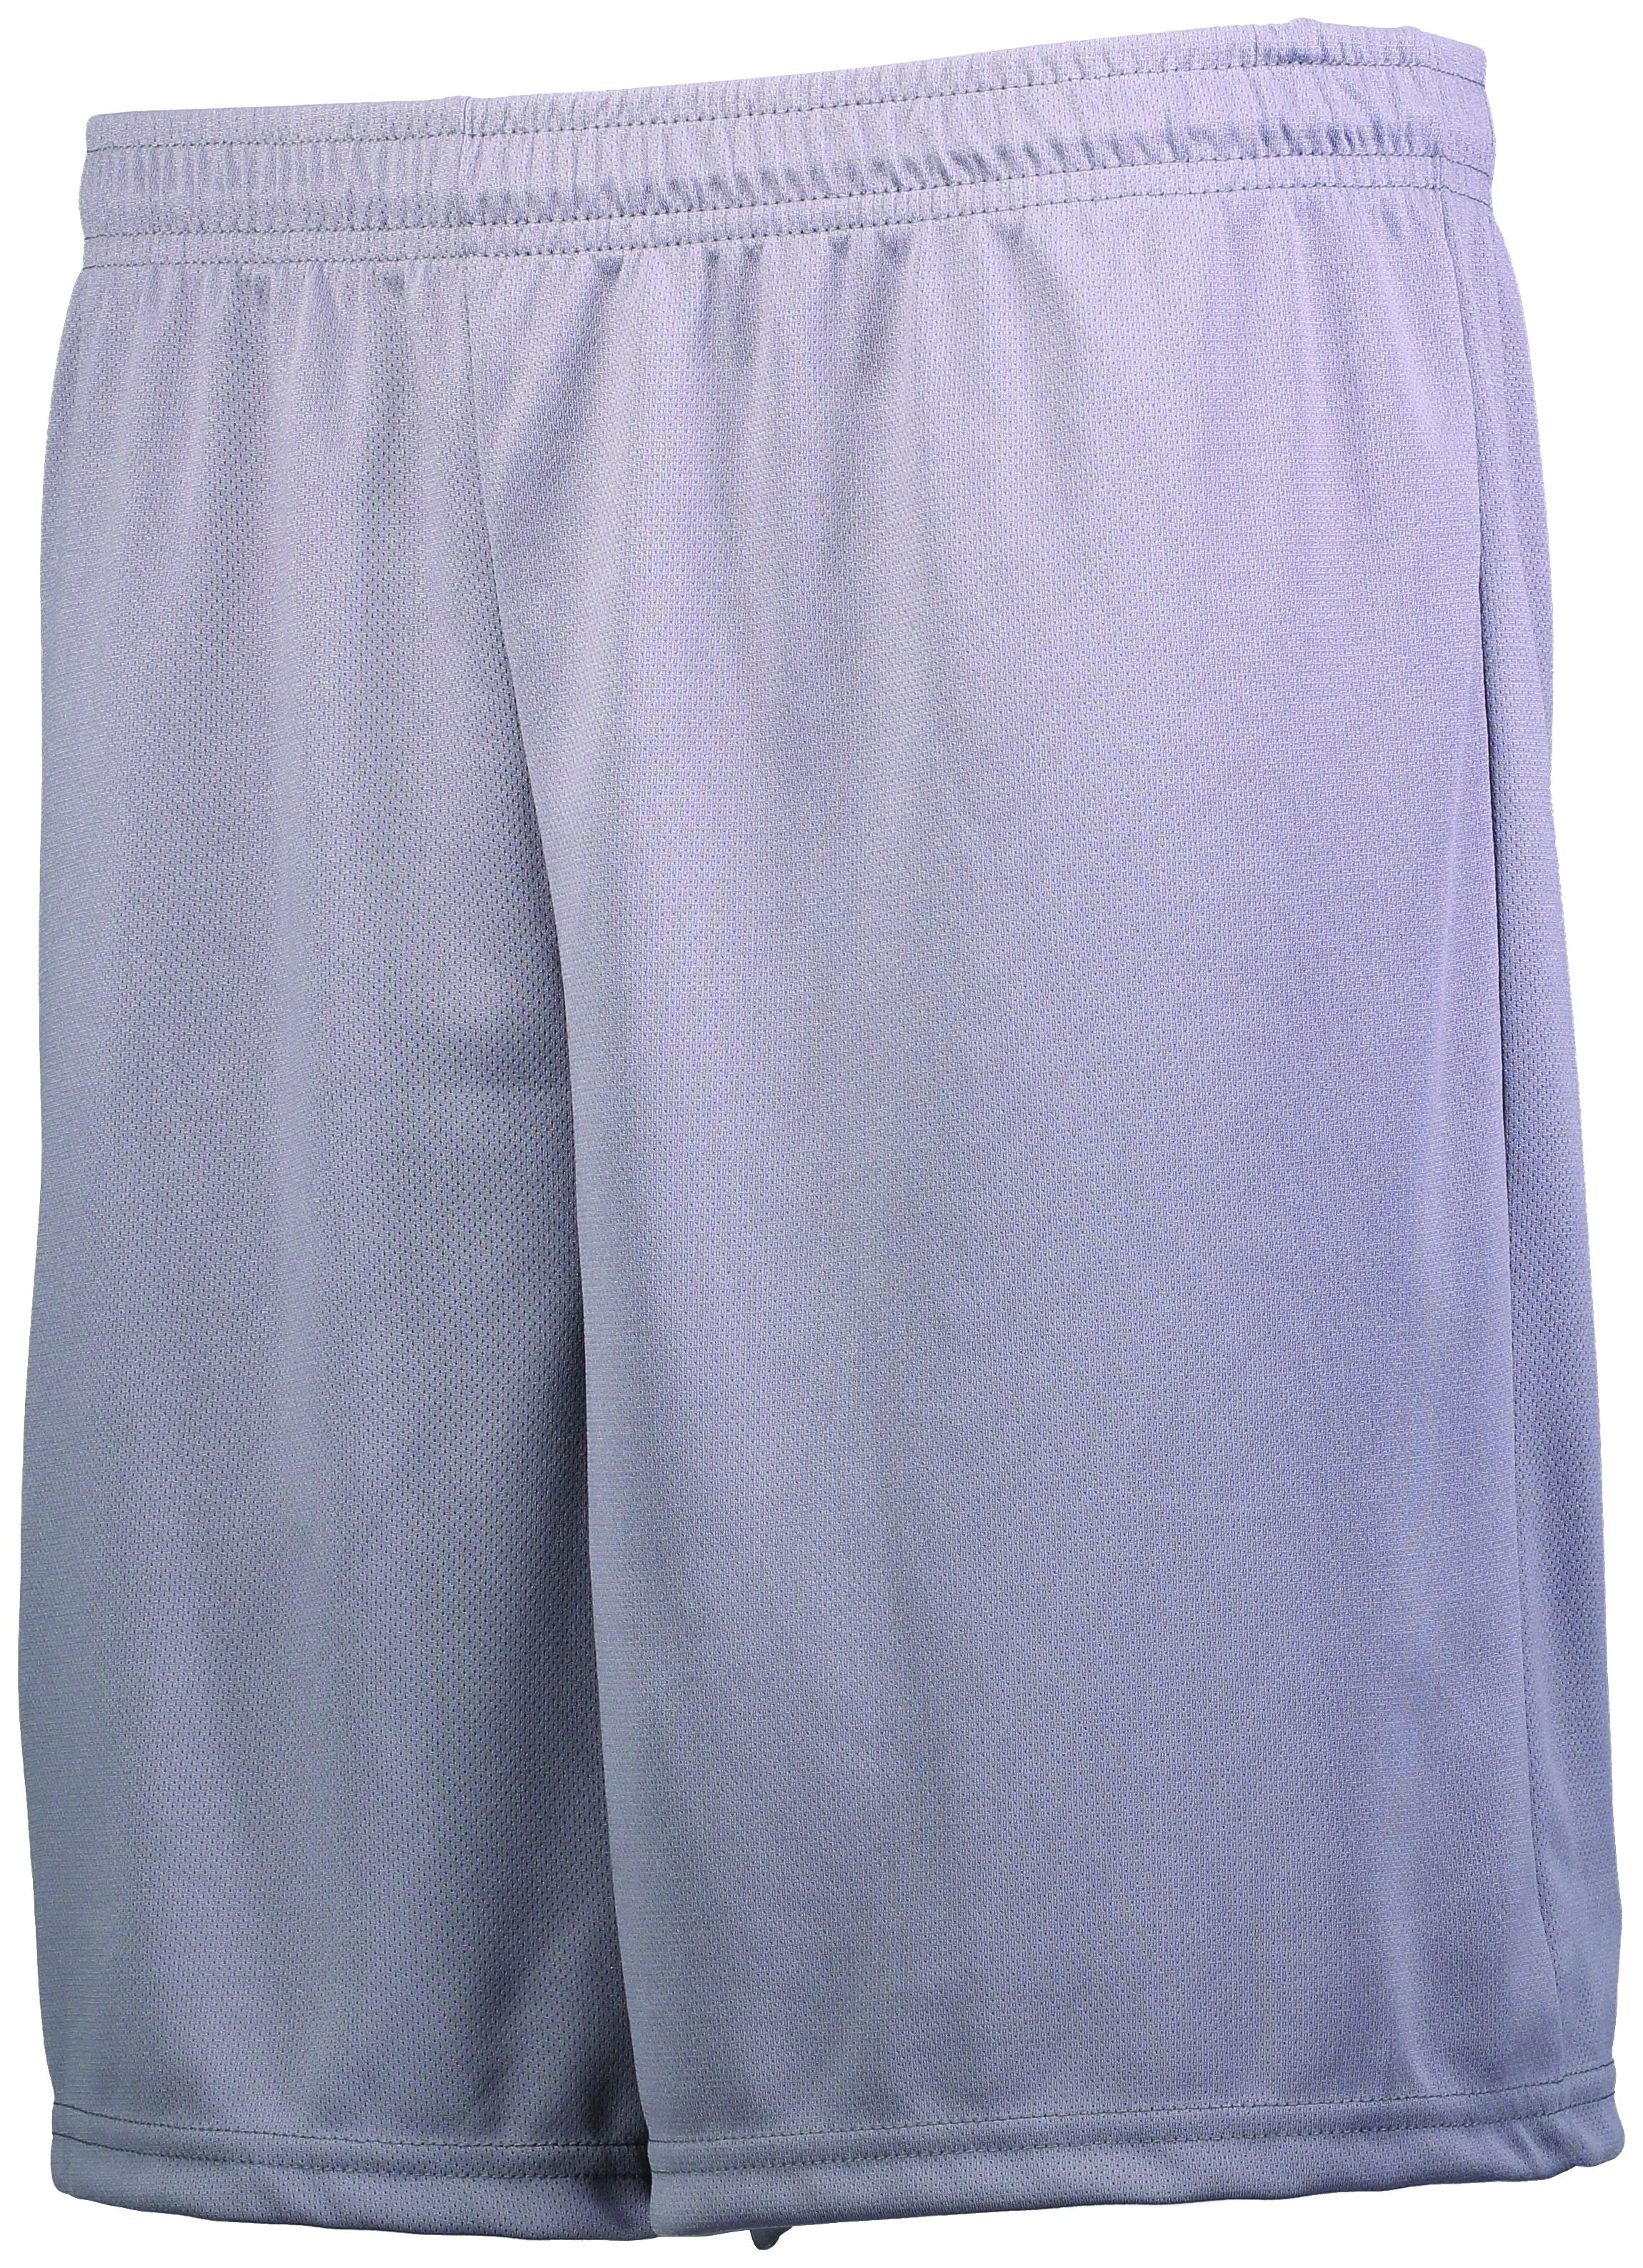 High 5 Youth Prevail Shorts in Graphite  -Part of the Youth, Youth-Shorts, High5-Products, Soccer, All-Sports-1 product lines at KanaleyCreations.com